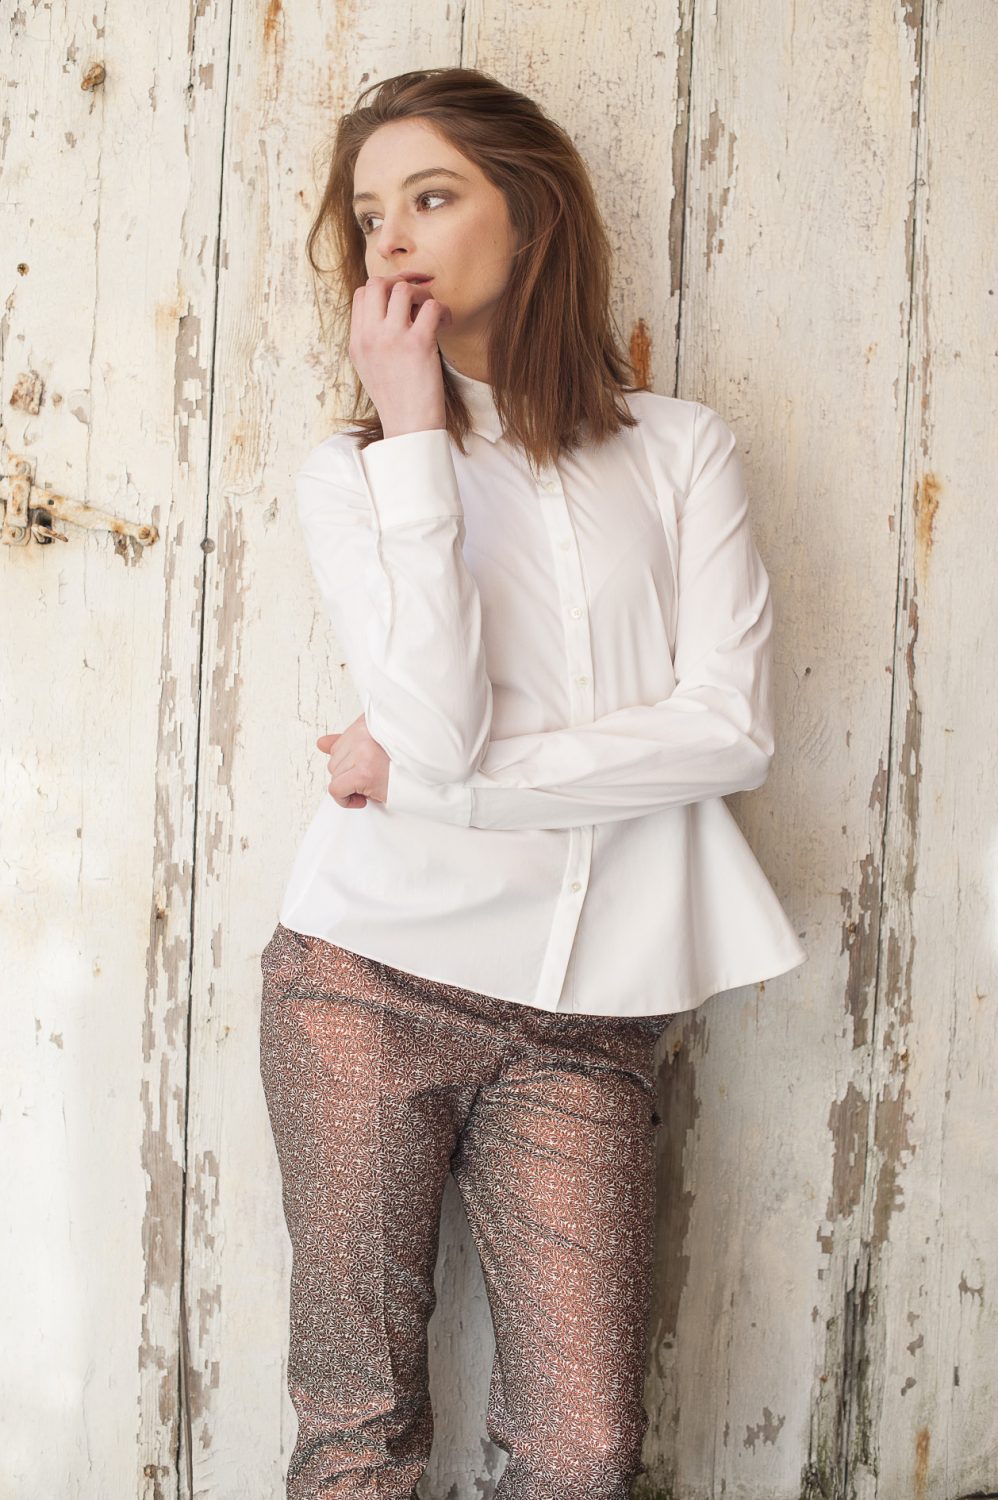 See By Chloé shirt, Emma Cook trousers, price on request, Alexandra Boutique, Tunbridge Wells 01892 529959 www.alexandra-boutique.co.uk